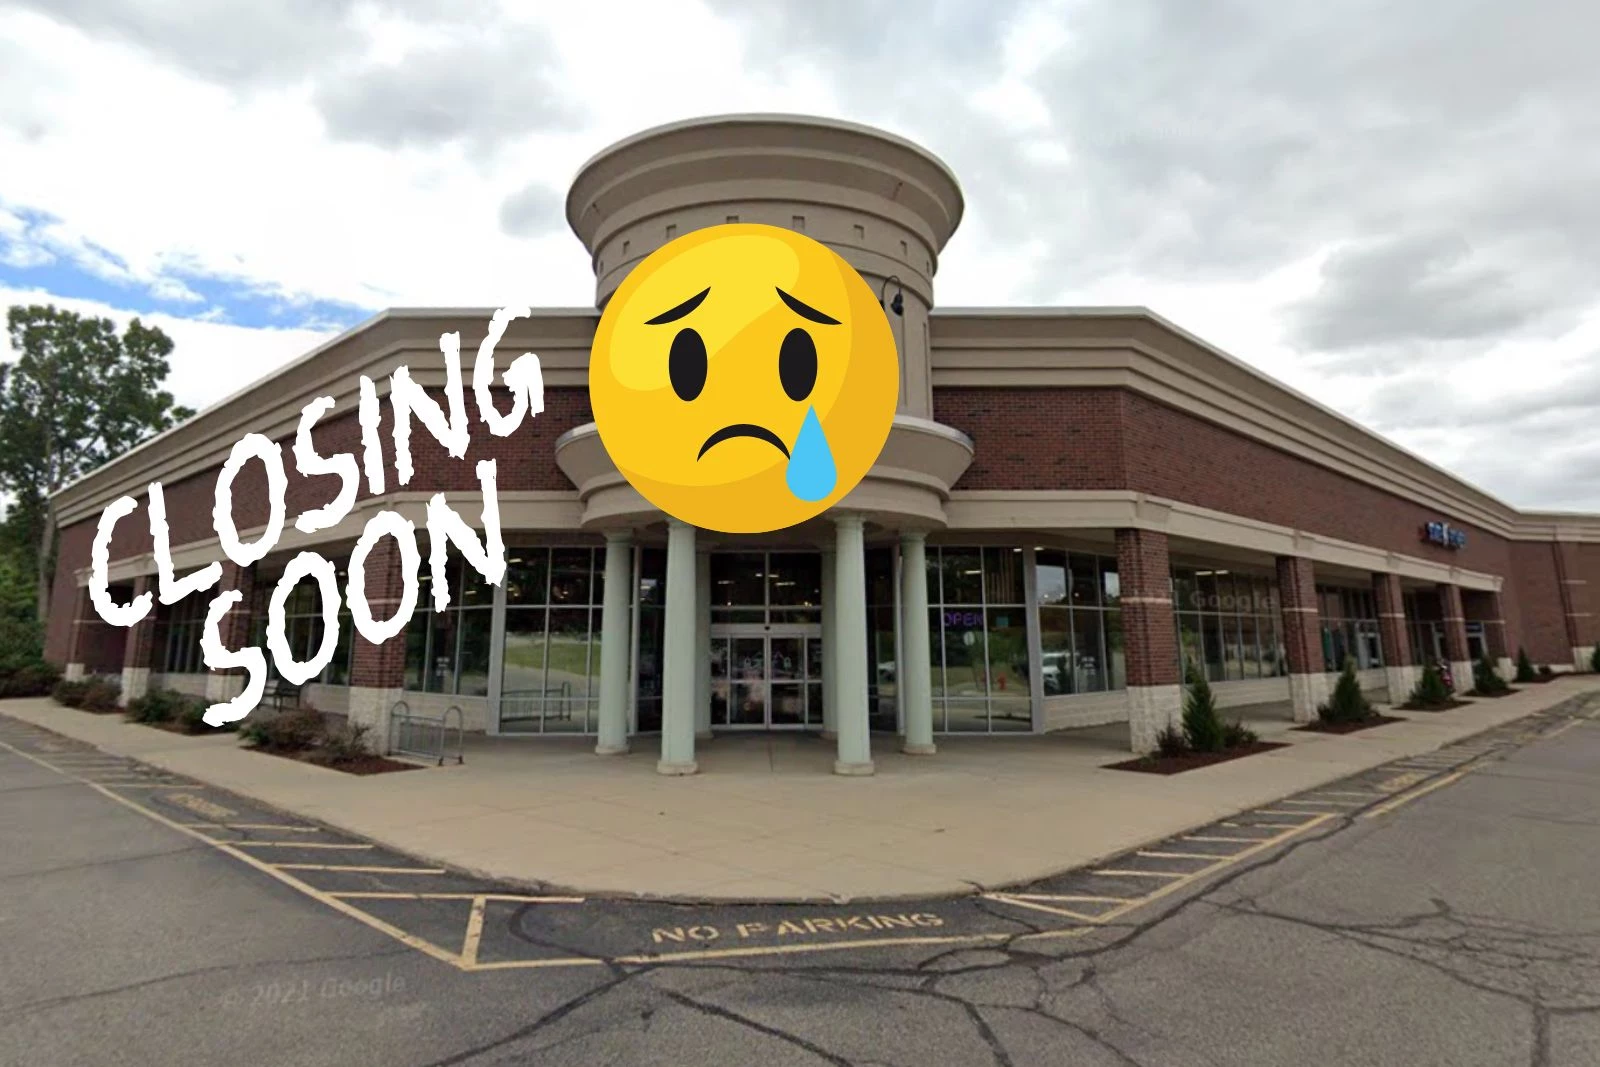 Another Business Closure Coming to East Lansing